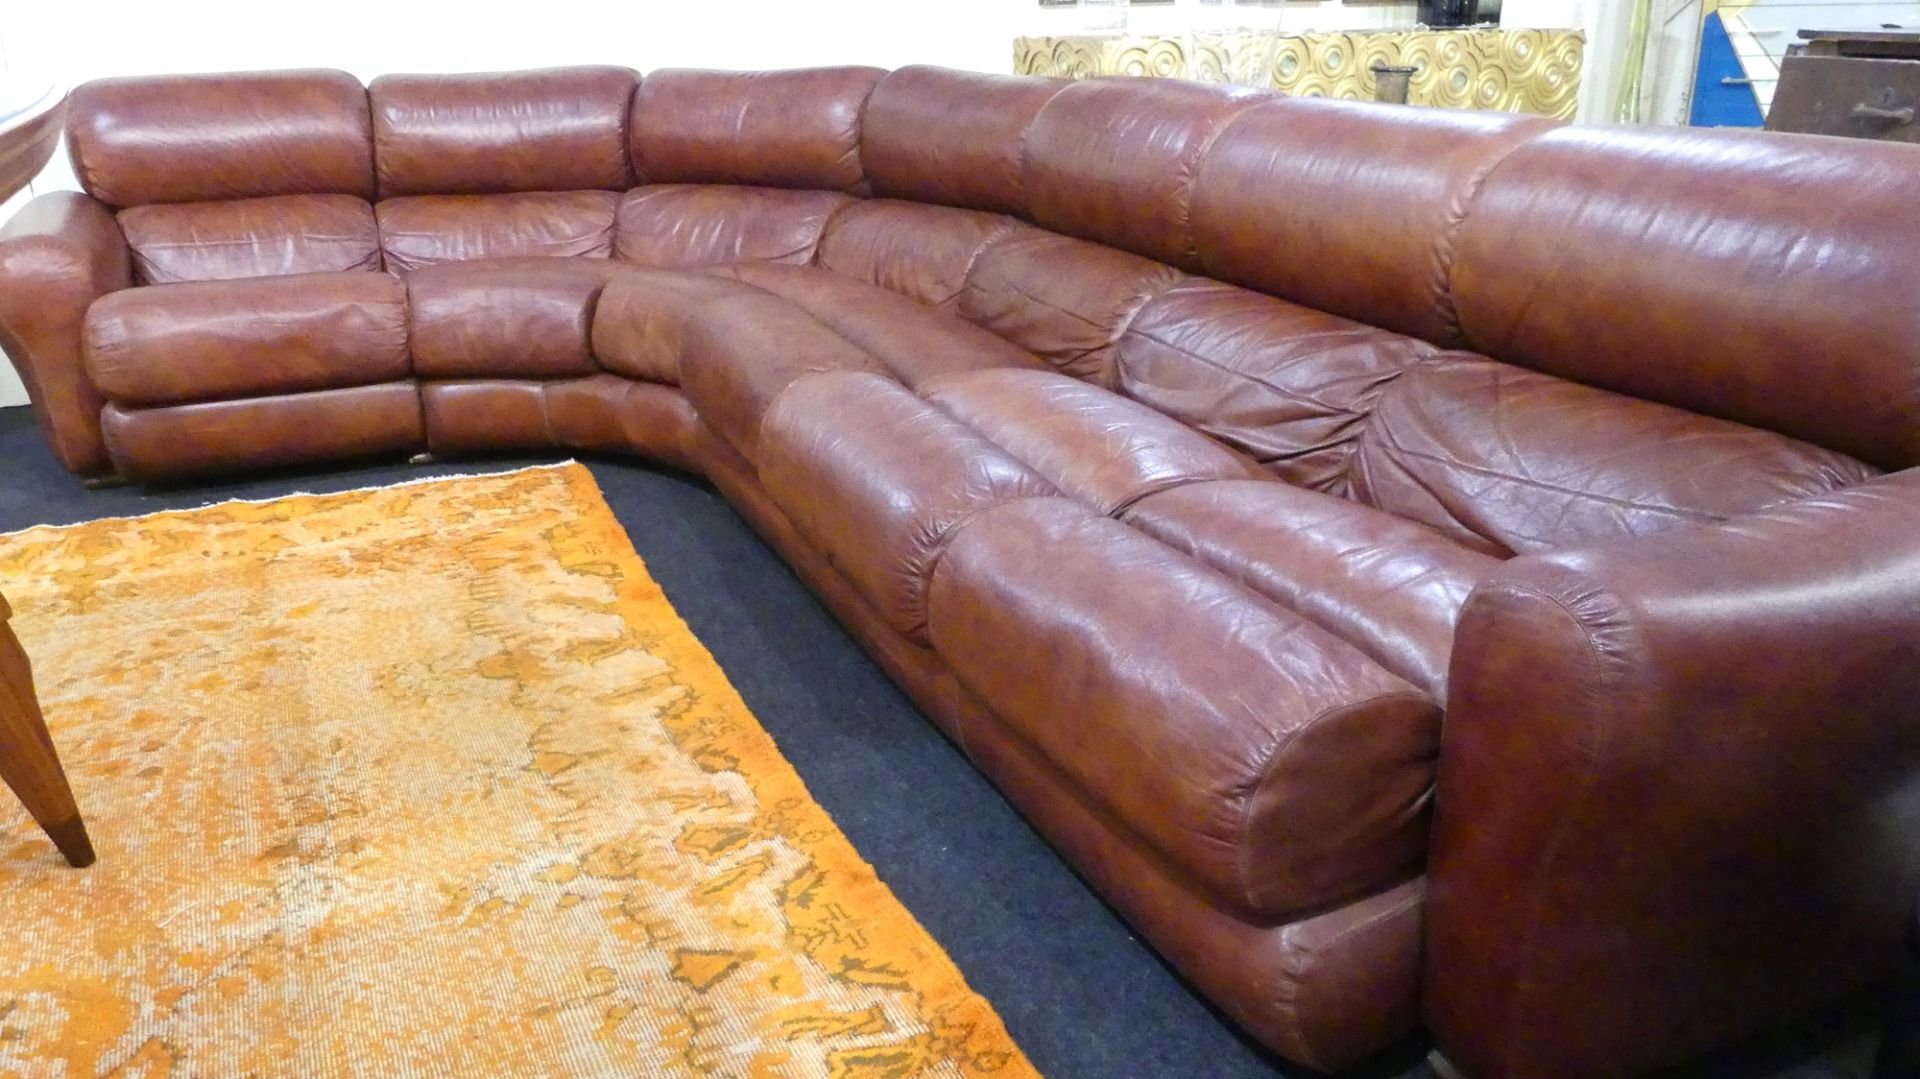 Large Insa Modular Sofa From The 70s In Aged Leather | Grand Vintage Pertaining To Modular Couches (View 16 of 20)